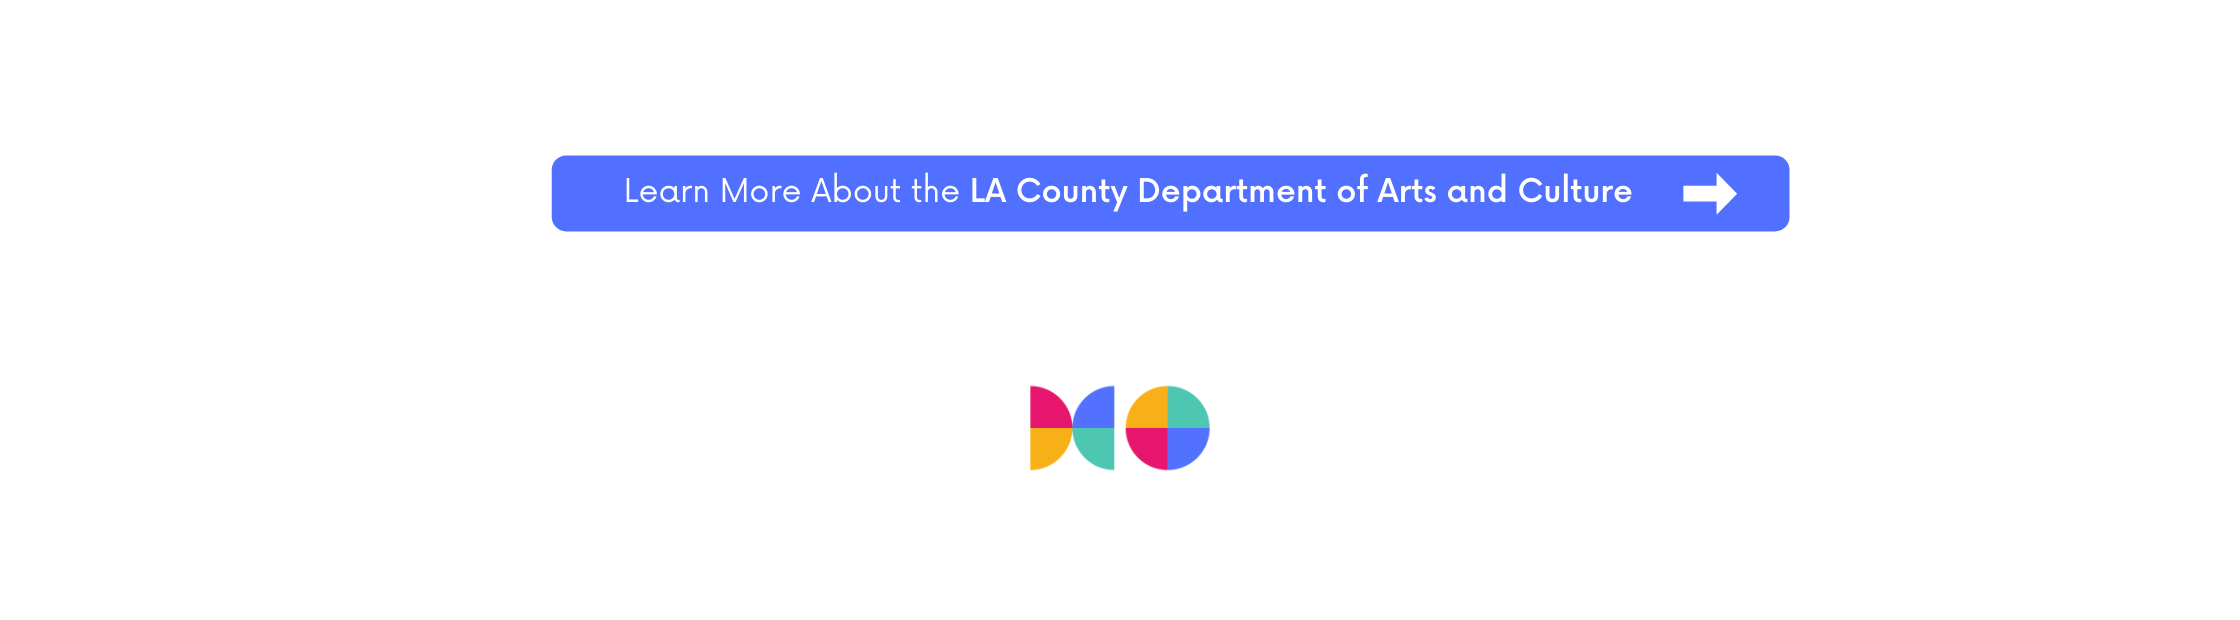 Learn More about LA County Department of Arts and Culture